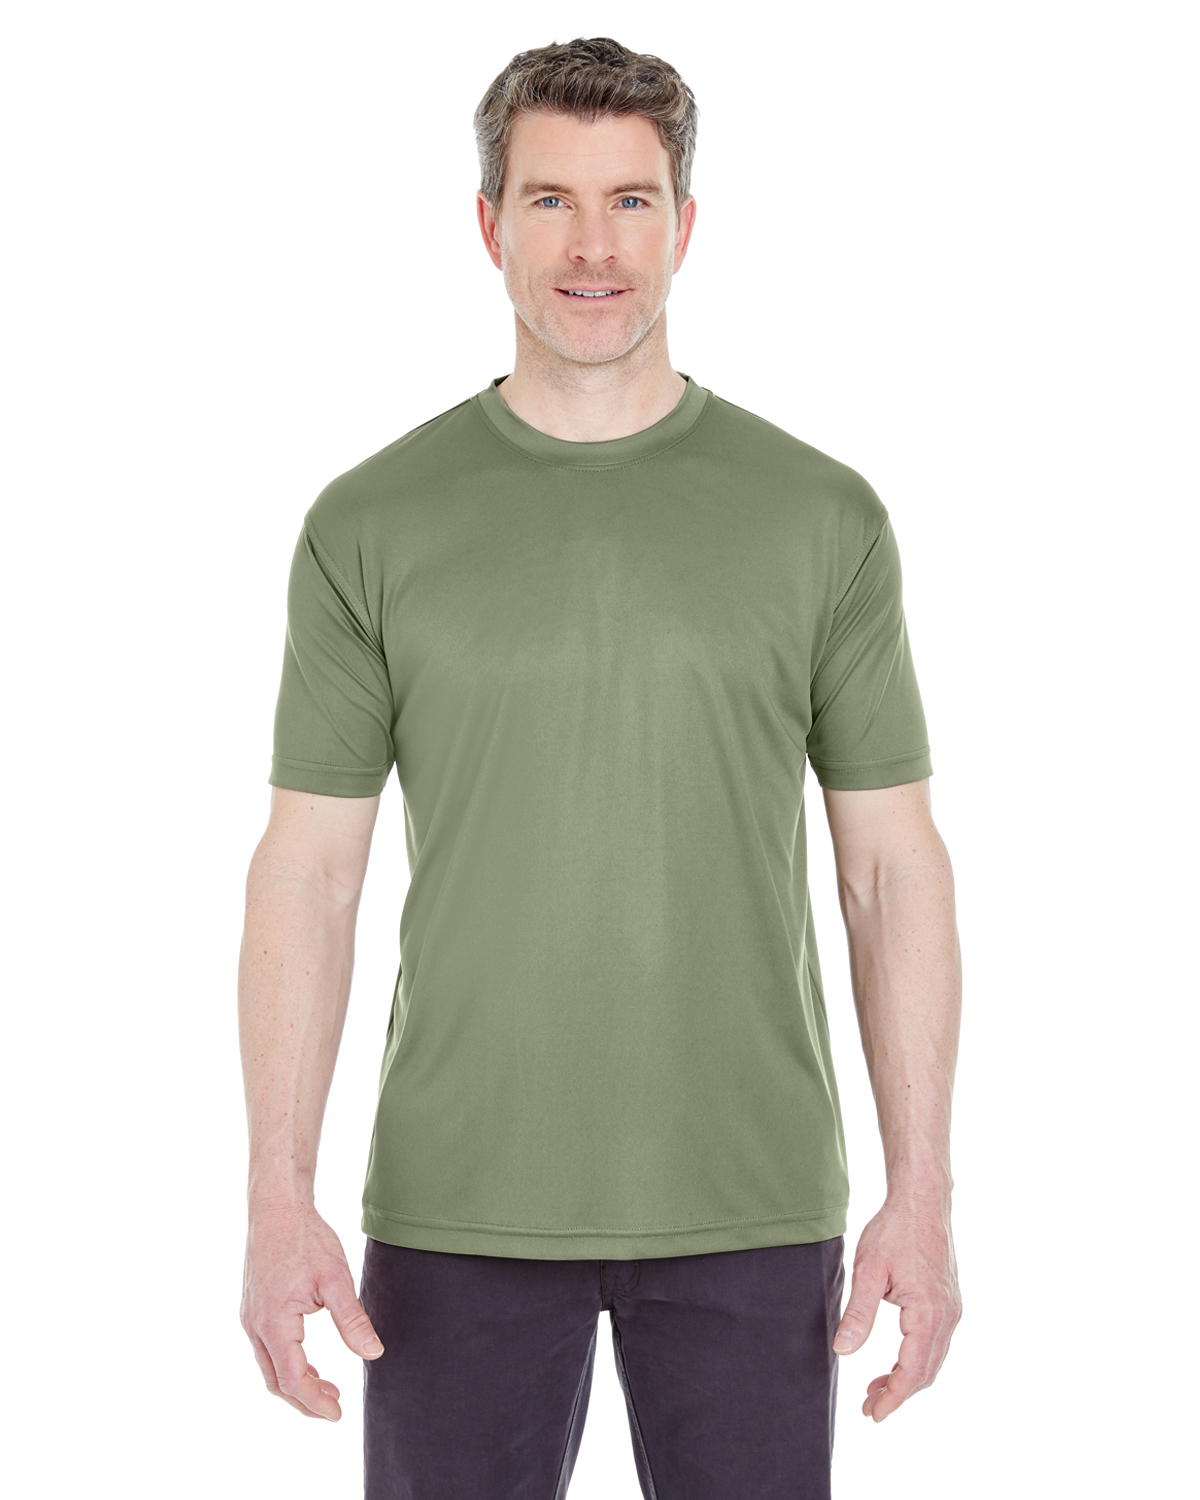 click to view military green